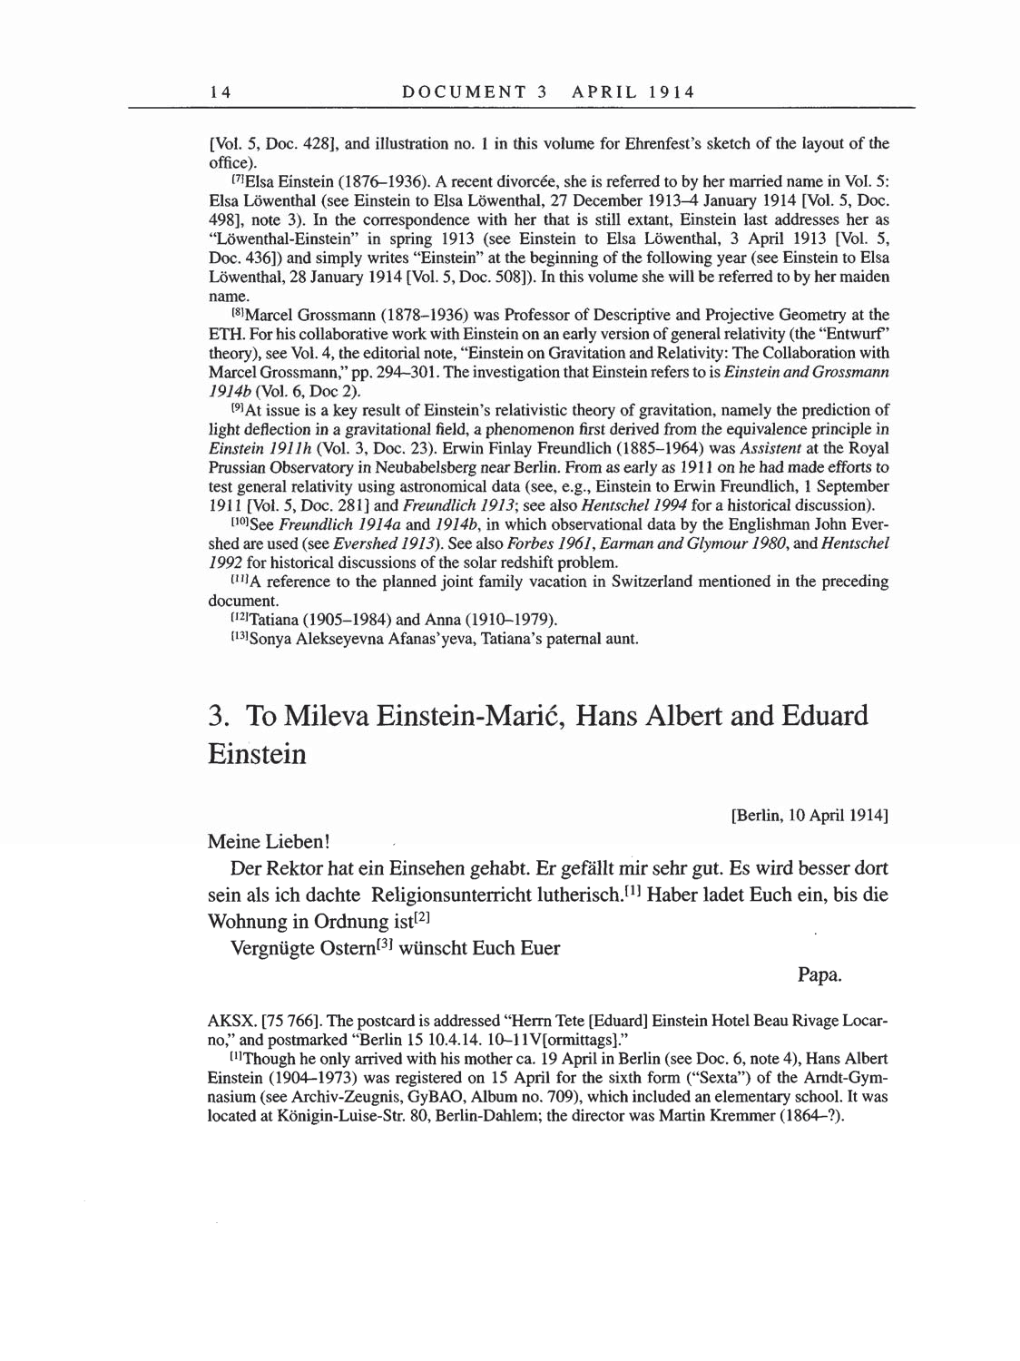 Volume 8, Part A: The Berlin Years: Correspondence 1914-1917 page 14